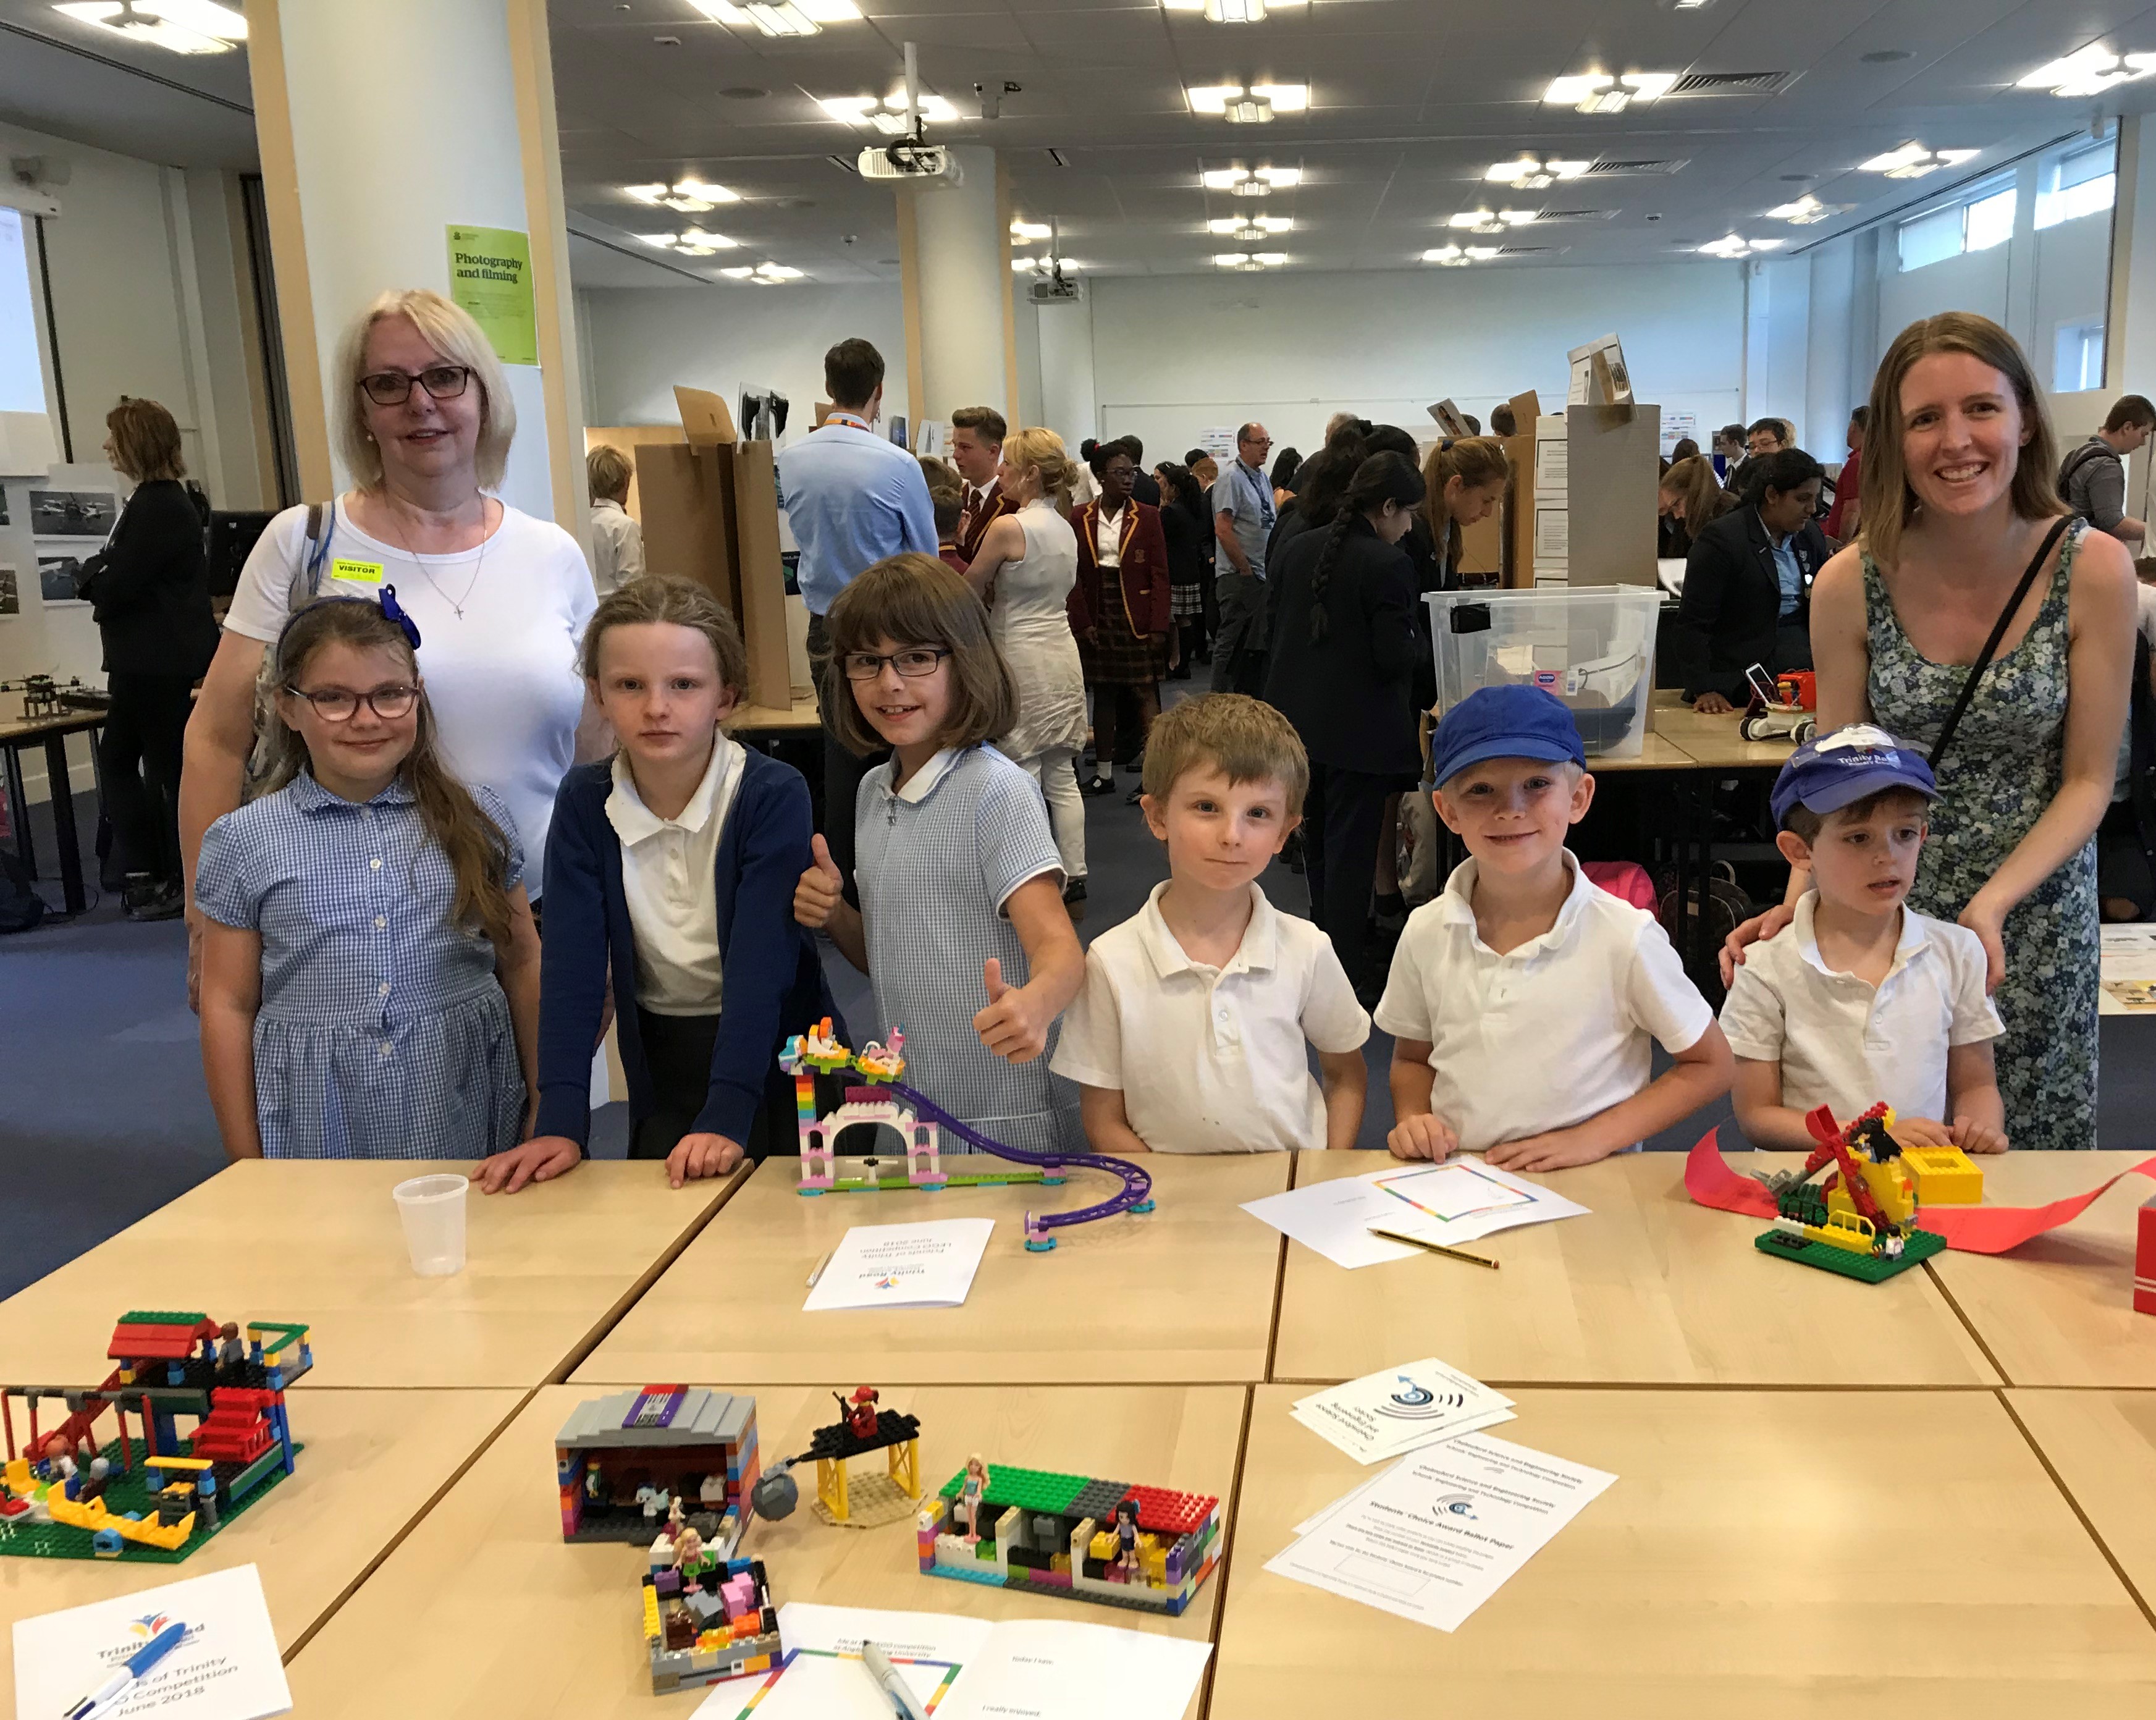 Children from Trinity Road Primary School proudly display their entries for the CSES competition at Anglia Ruskin University